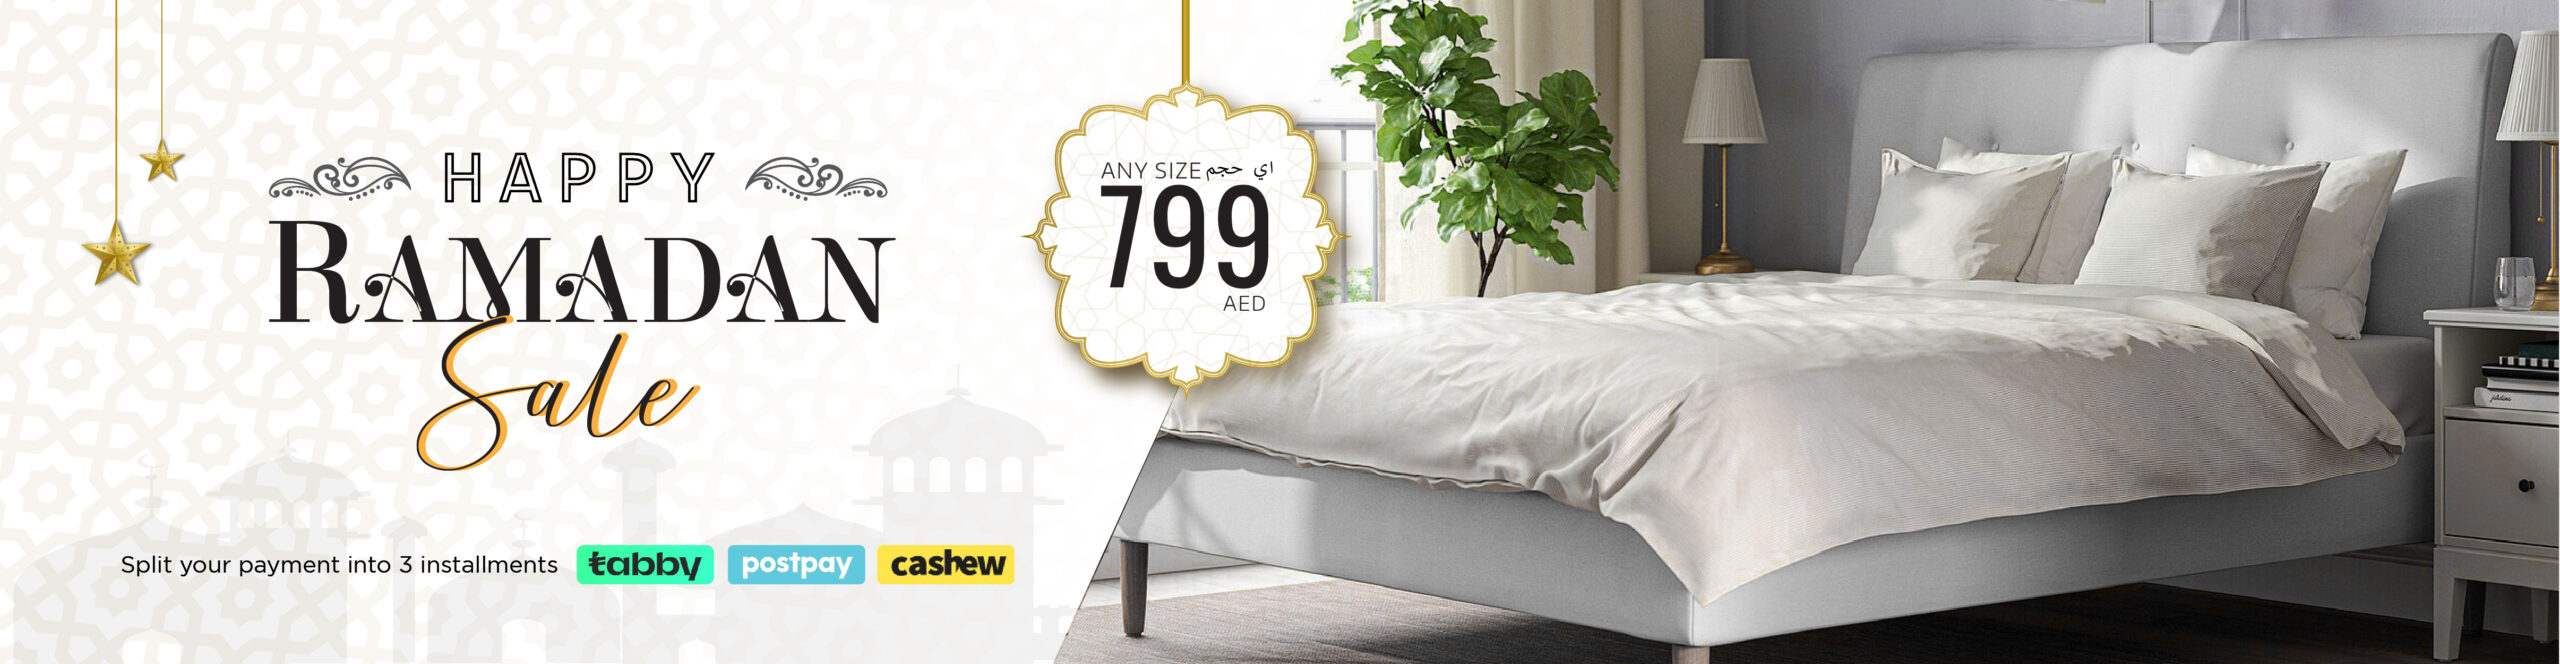 Ramadan Sale For Any Size Bed